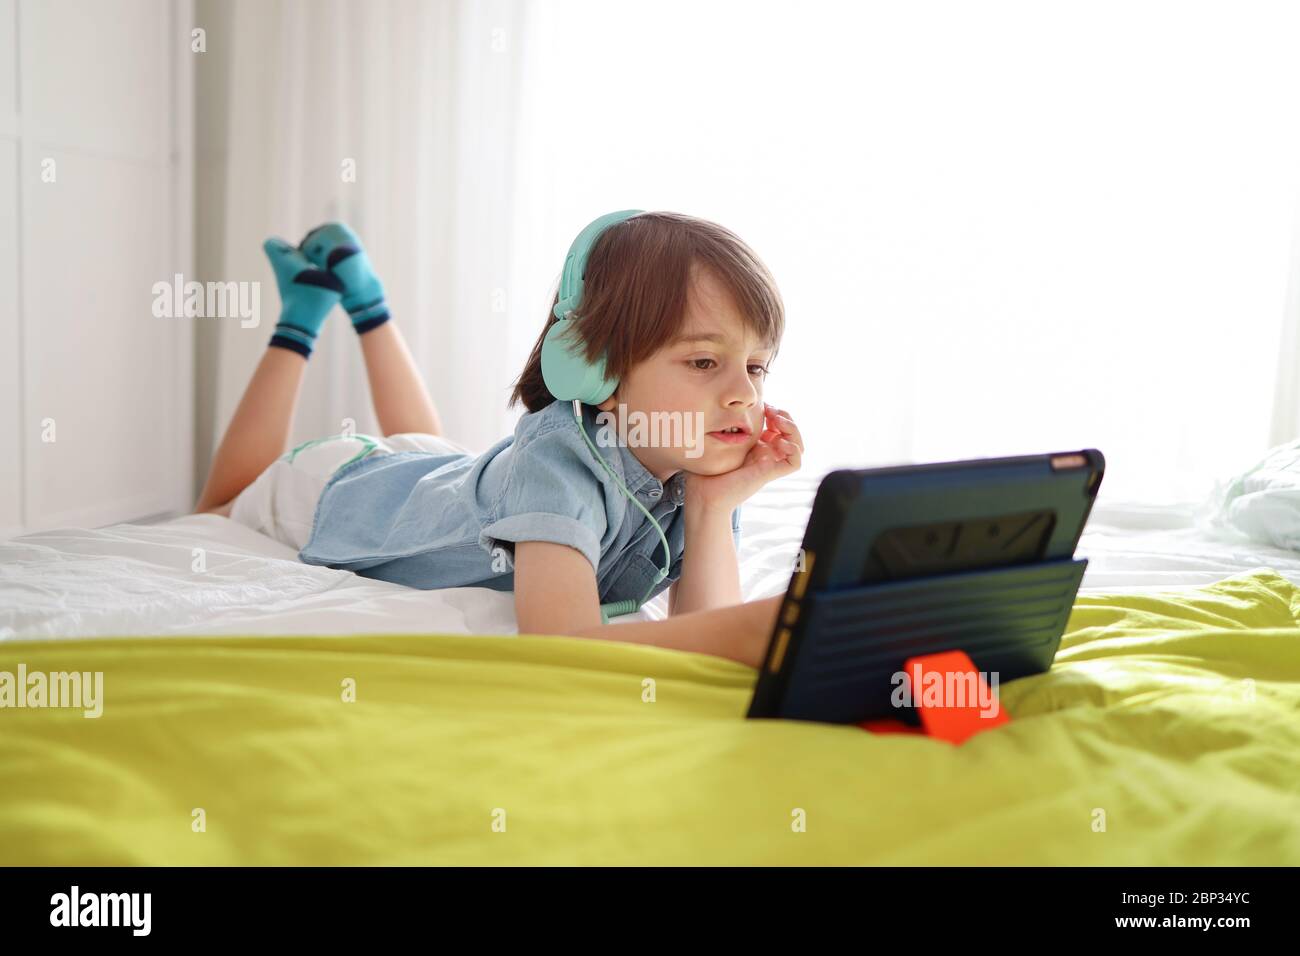 Relaxed little boy doing online lesson from home using headphones and a tablet. Social distance during Quarantine and Online Education Concept Stock Photo